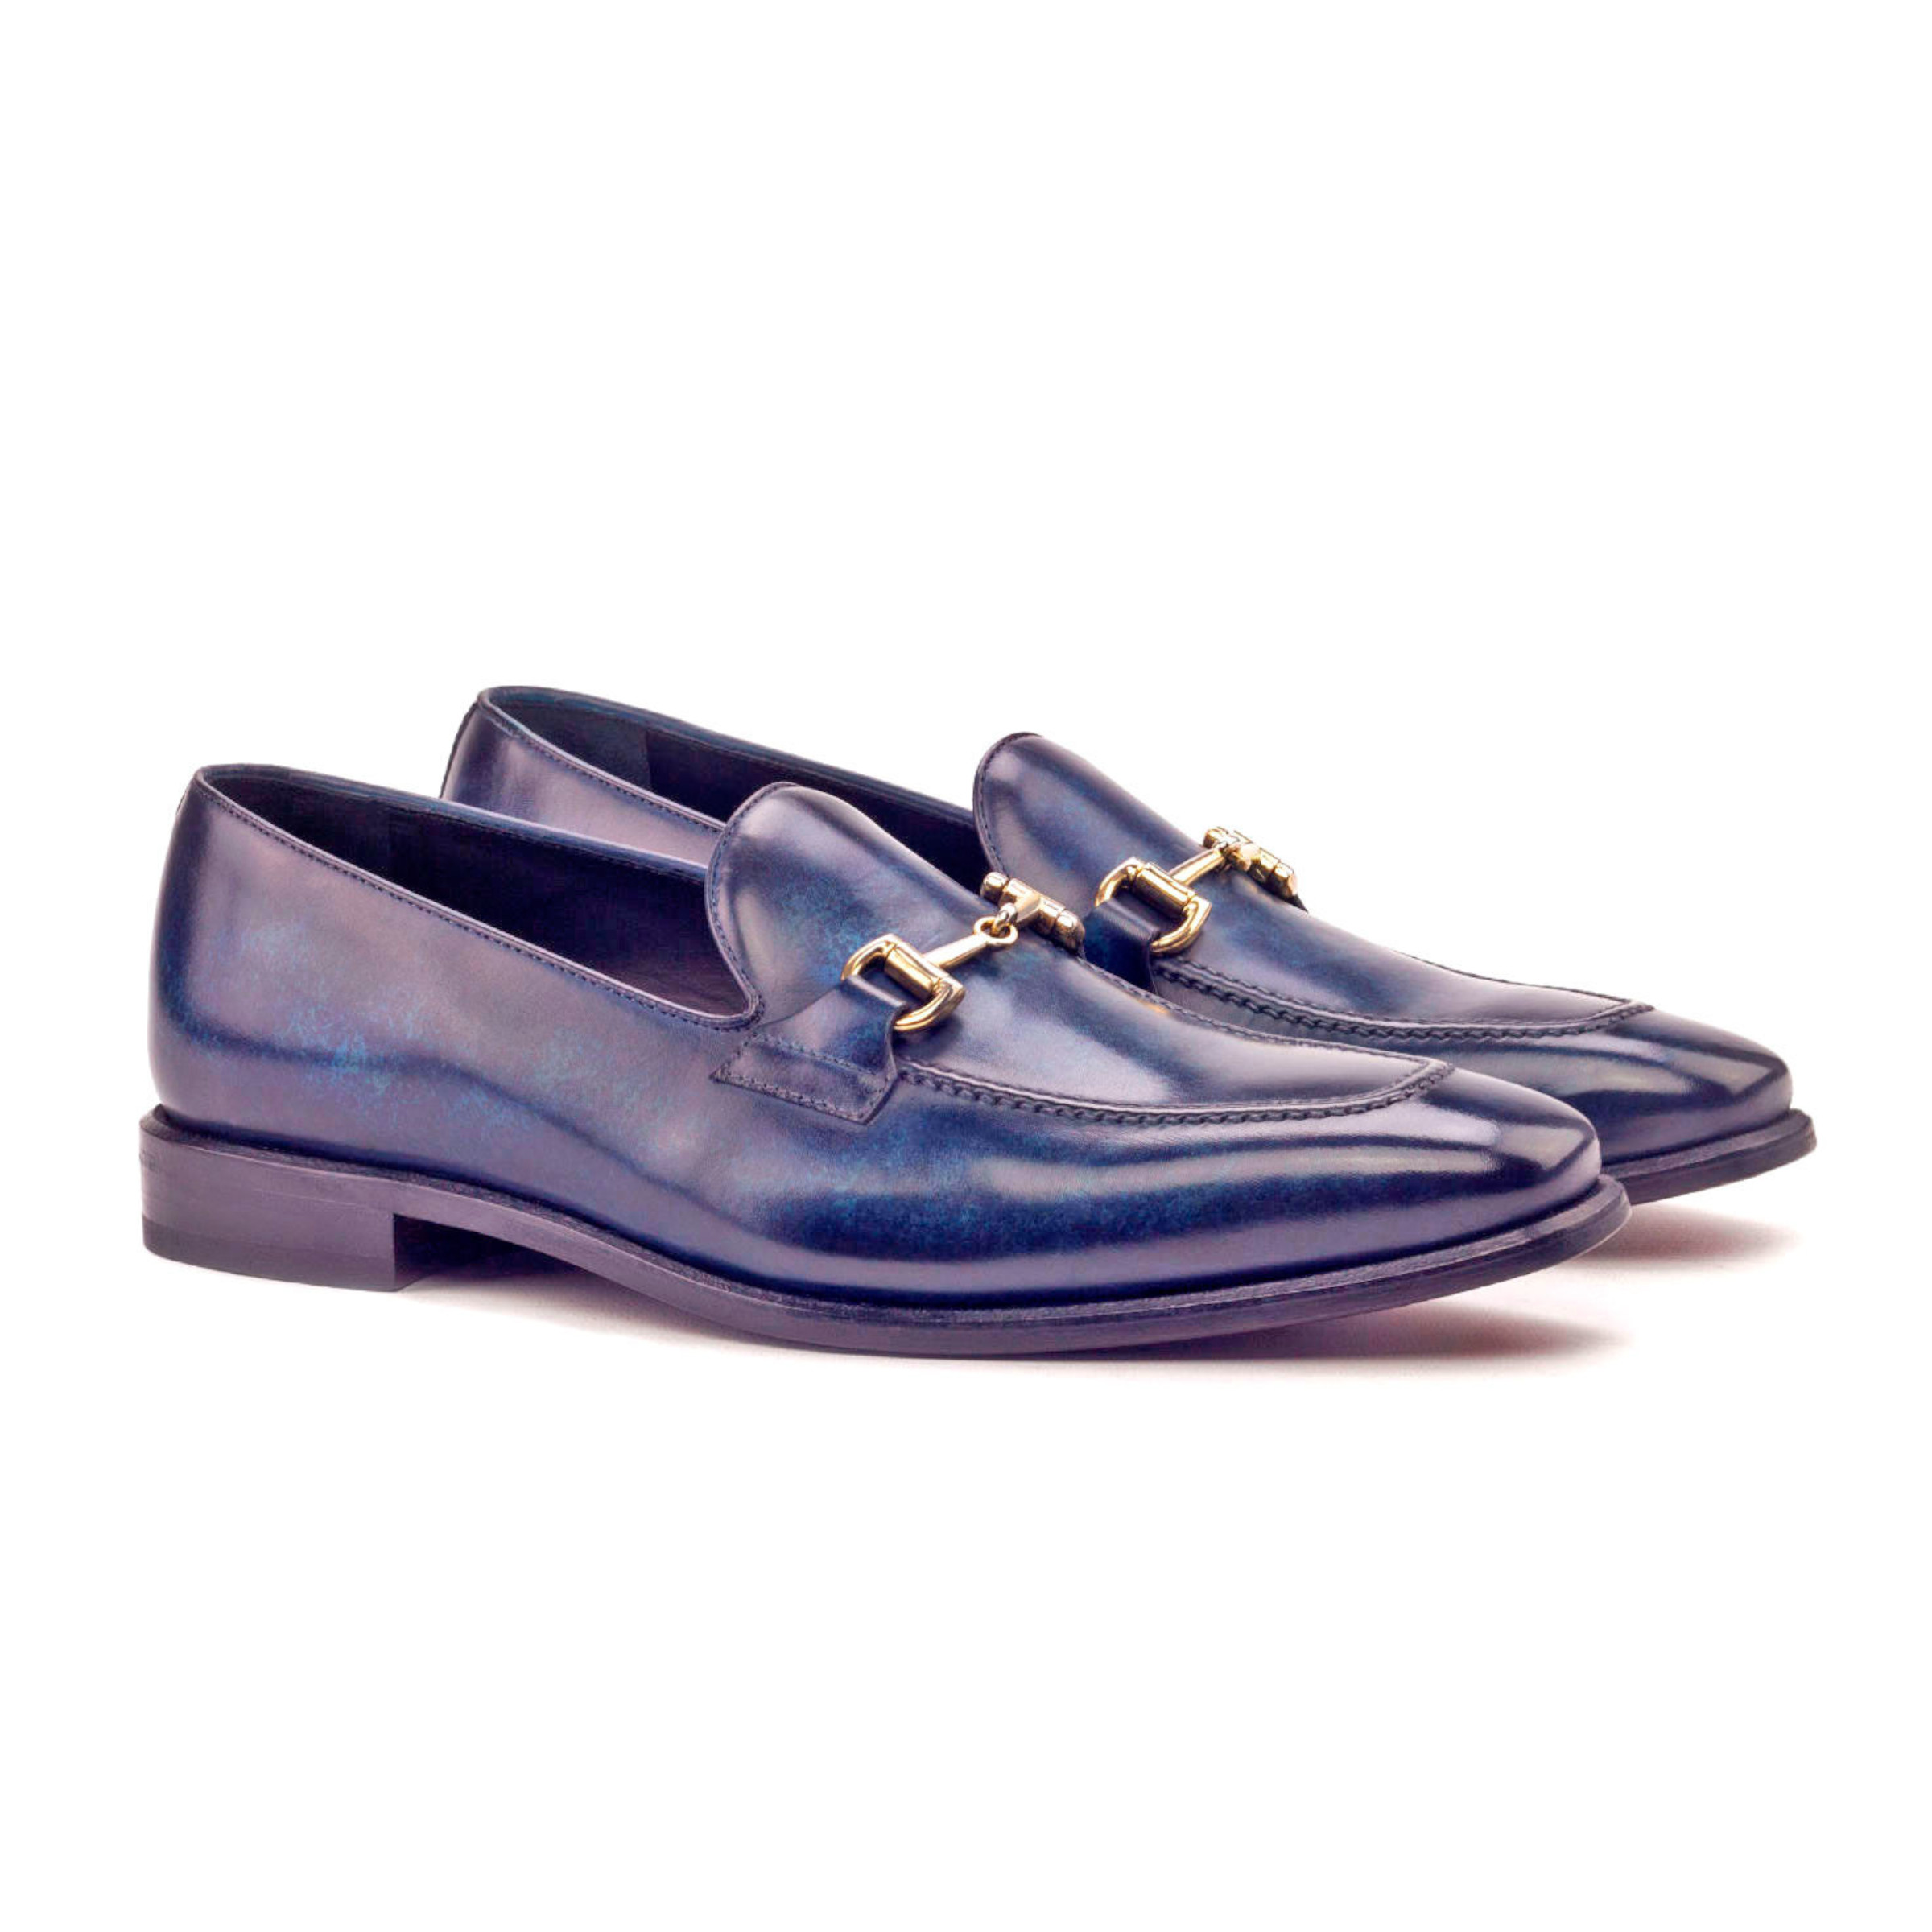 The Richmond: Peacock Patina Bit. Denim patina loafers with metal buckle against white background.